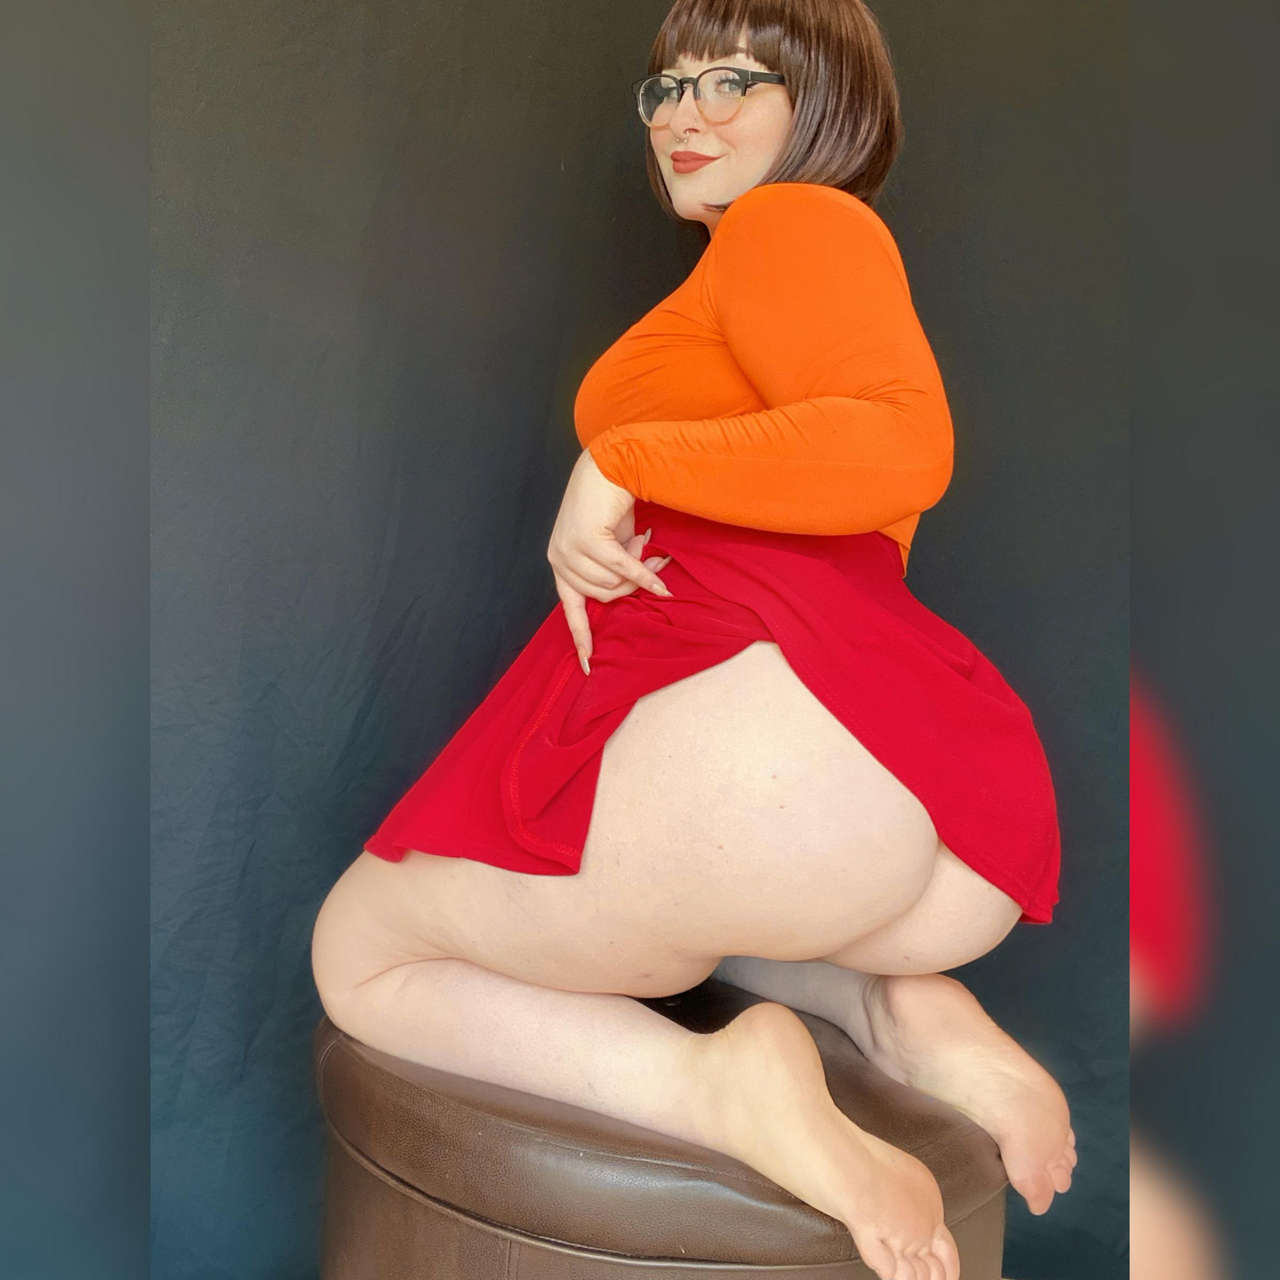 Self As Velma Dinkley From Scooby Do